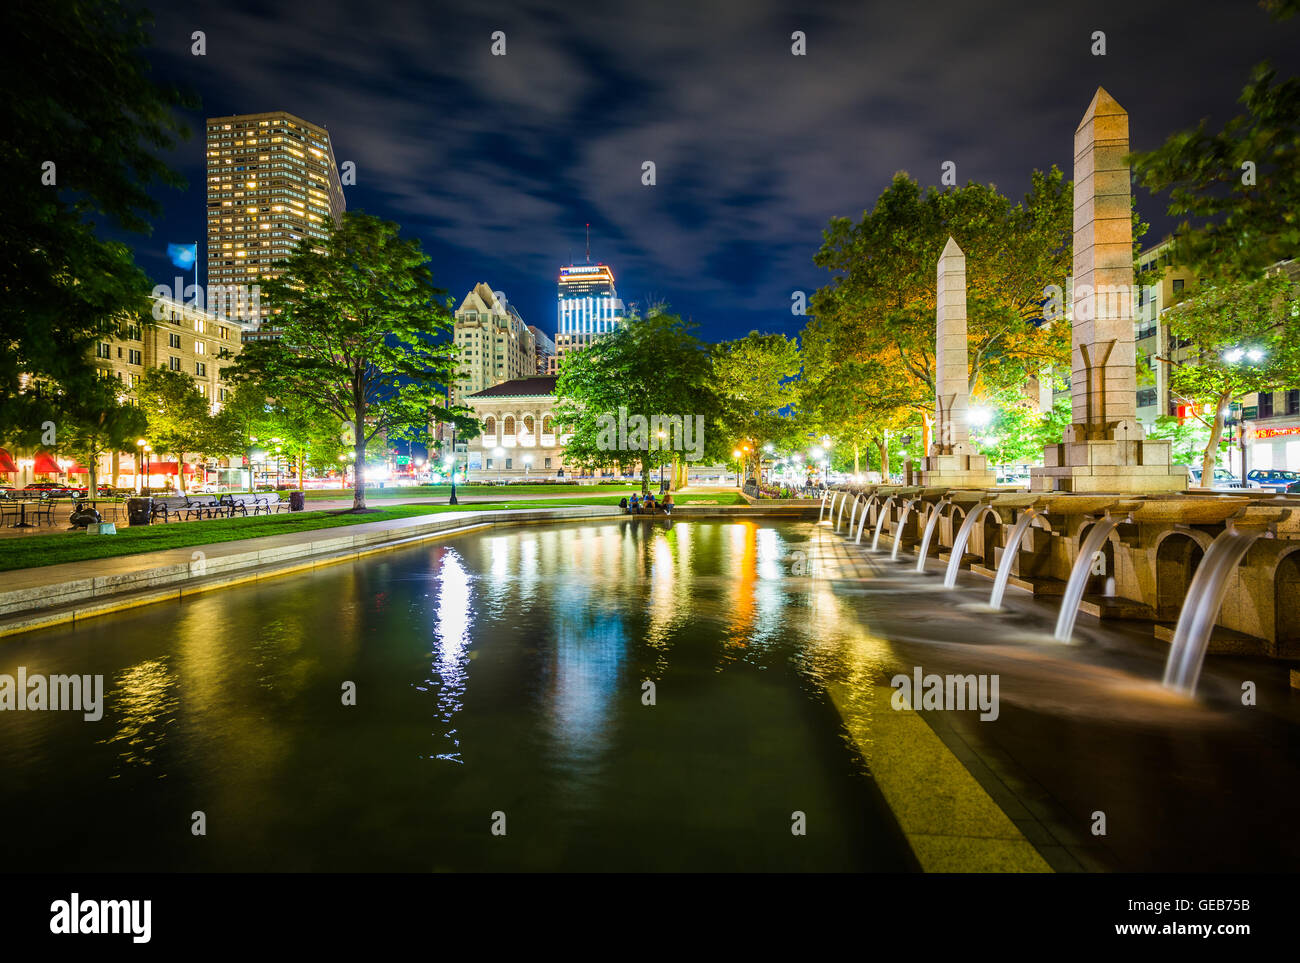 Fountains and buildings at Copley Square at night, in Boston, Massachusetts. Stock Photo